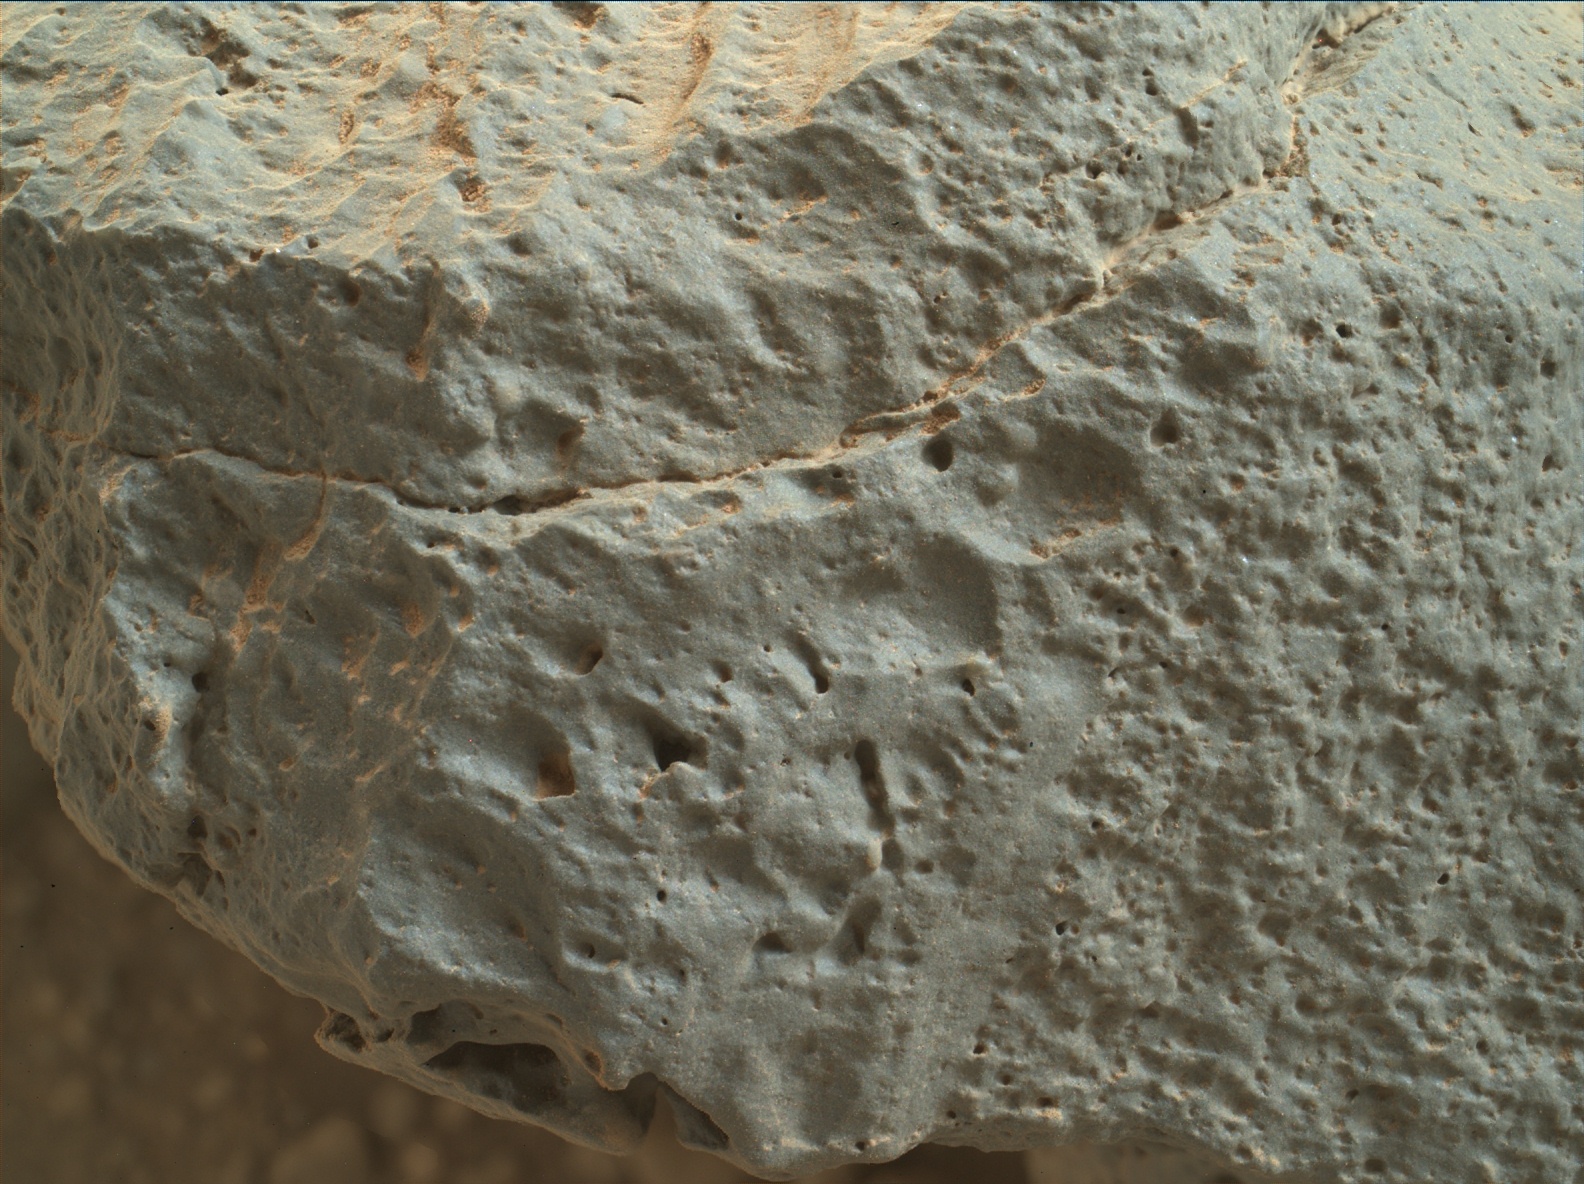 Nasa's Mars rover Curiosity acquired this image using its Mars Hand Lens Imager (MAHLI) on Sol 1082